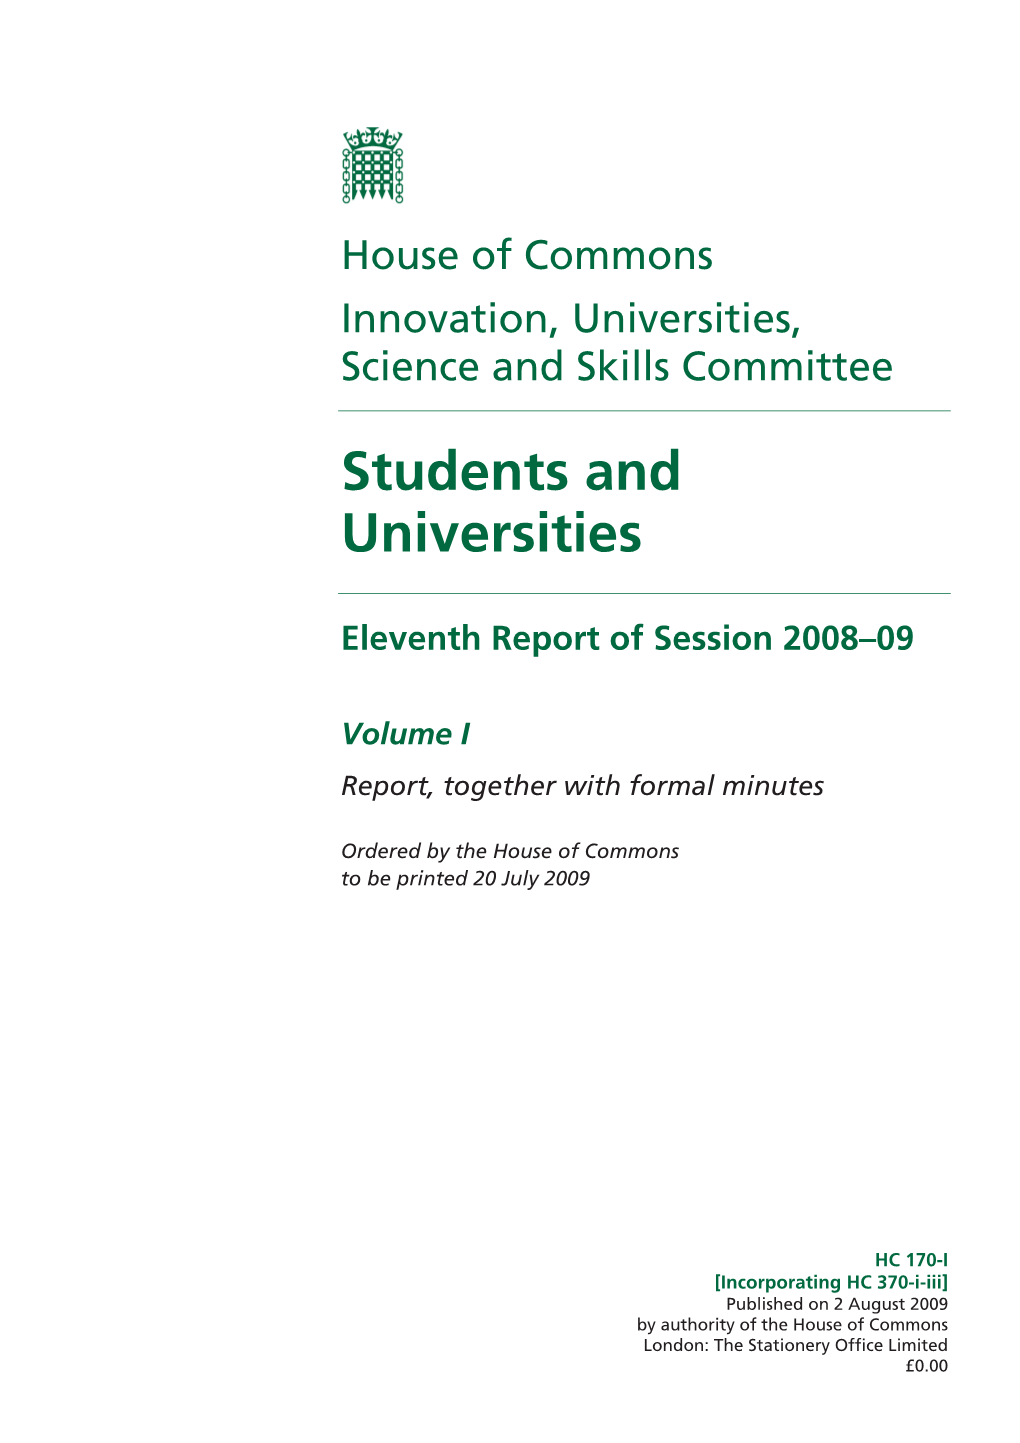 Students and Universities